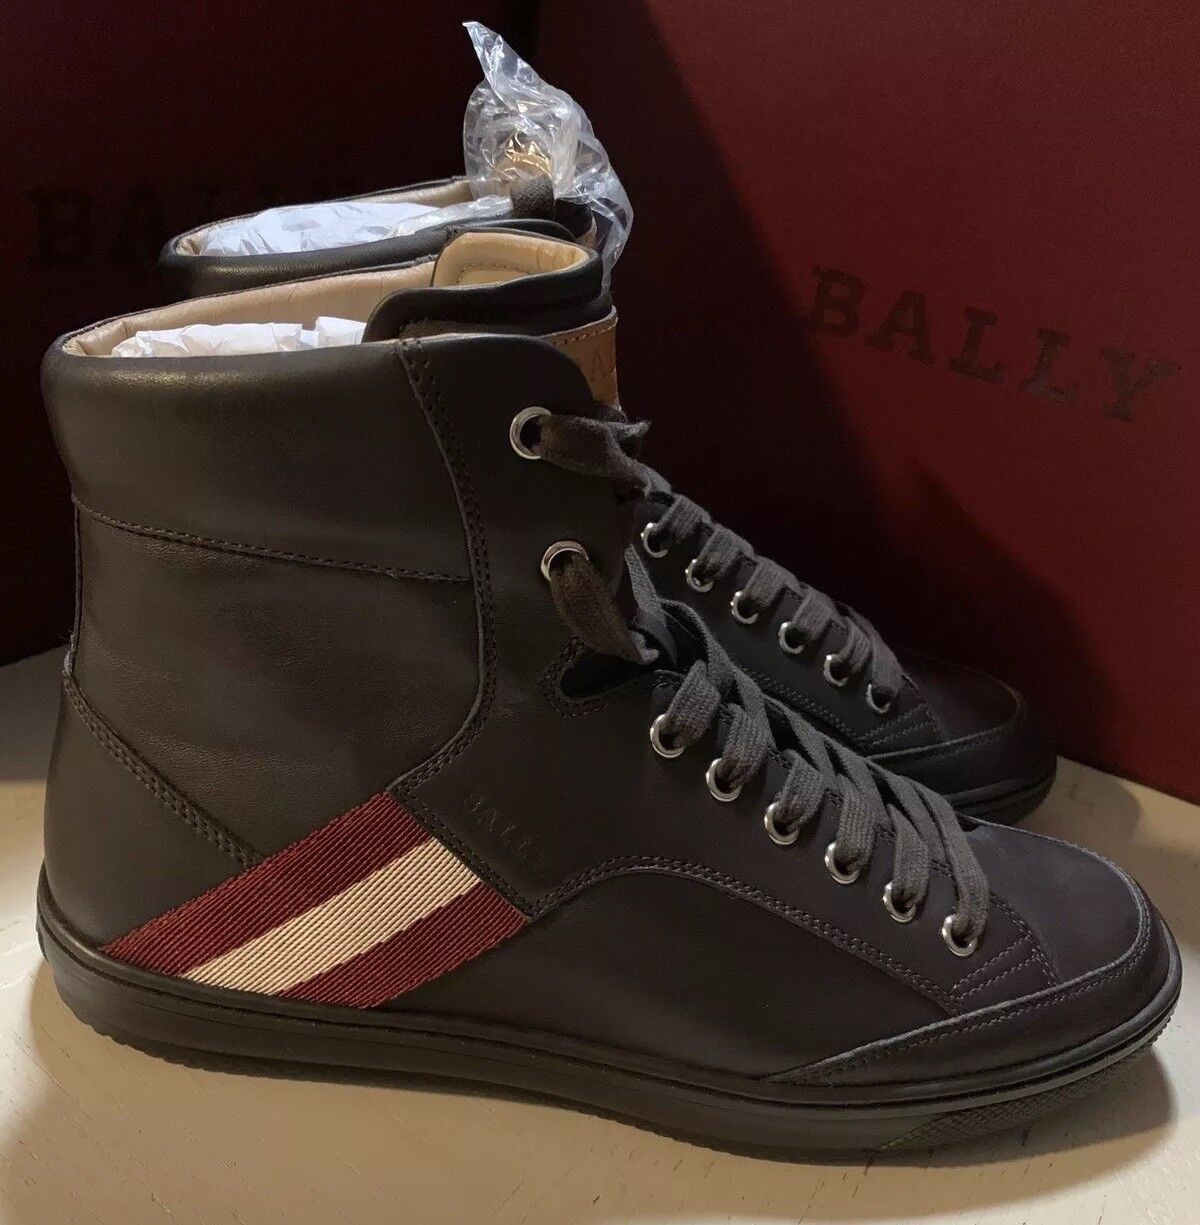 Bally Men Oldani Leather High-Top Sneakers Brown ( Chocolate ) 7 US New $650